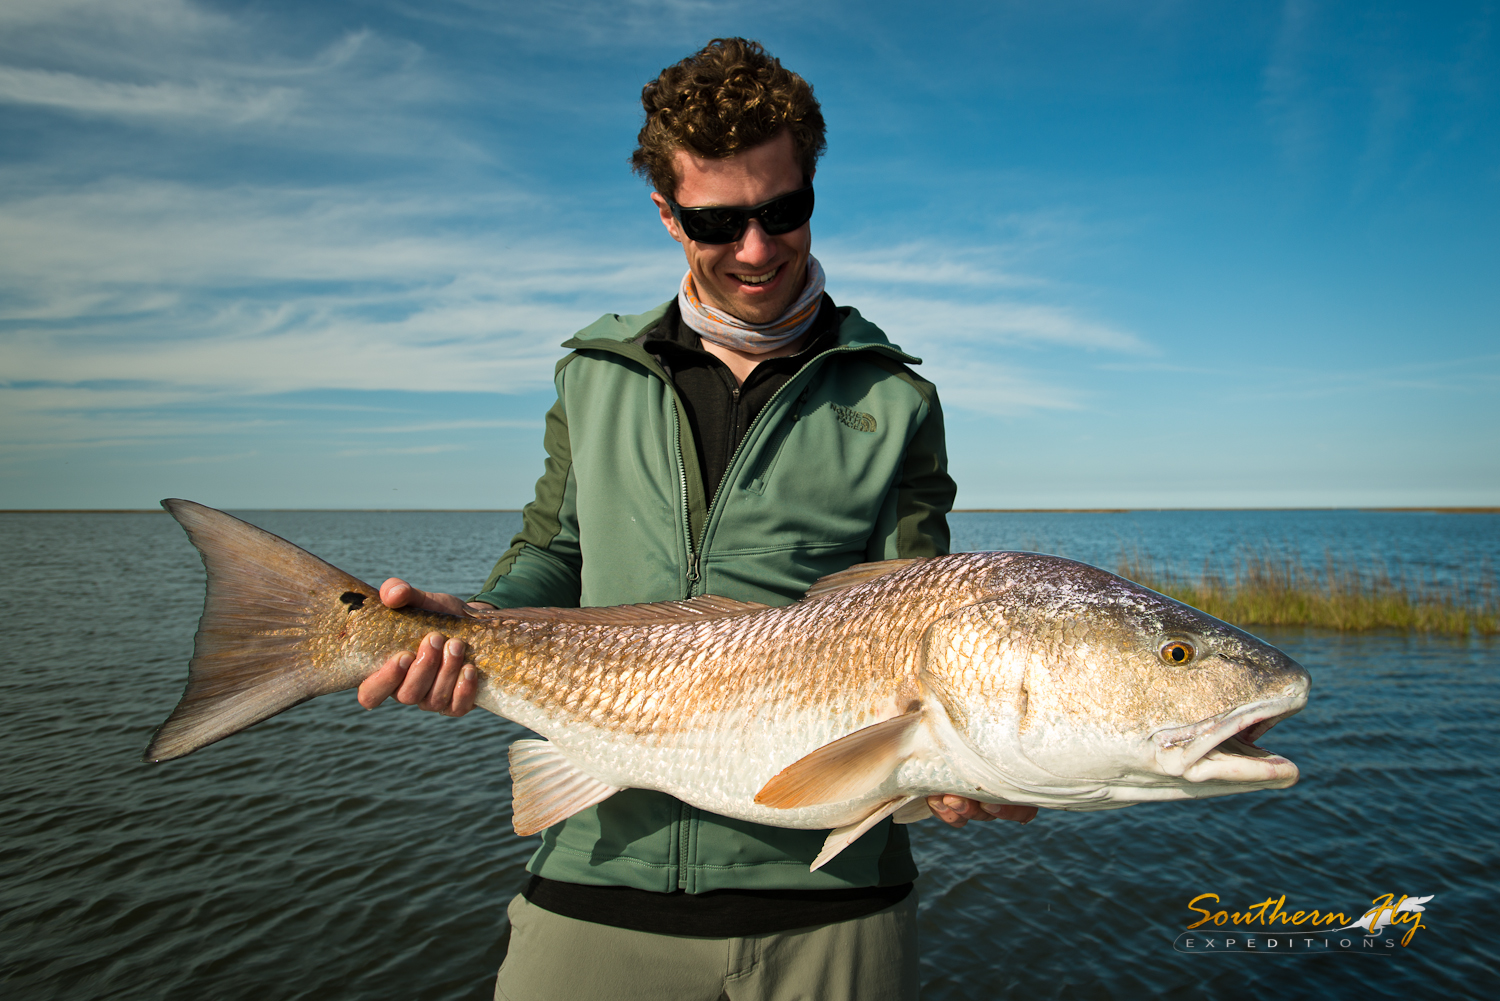 fly fishing new orleans louisiana with Southern Fly Expeditions the best fly fishing guide in the south 